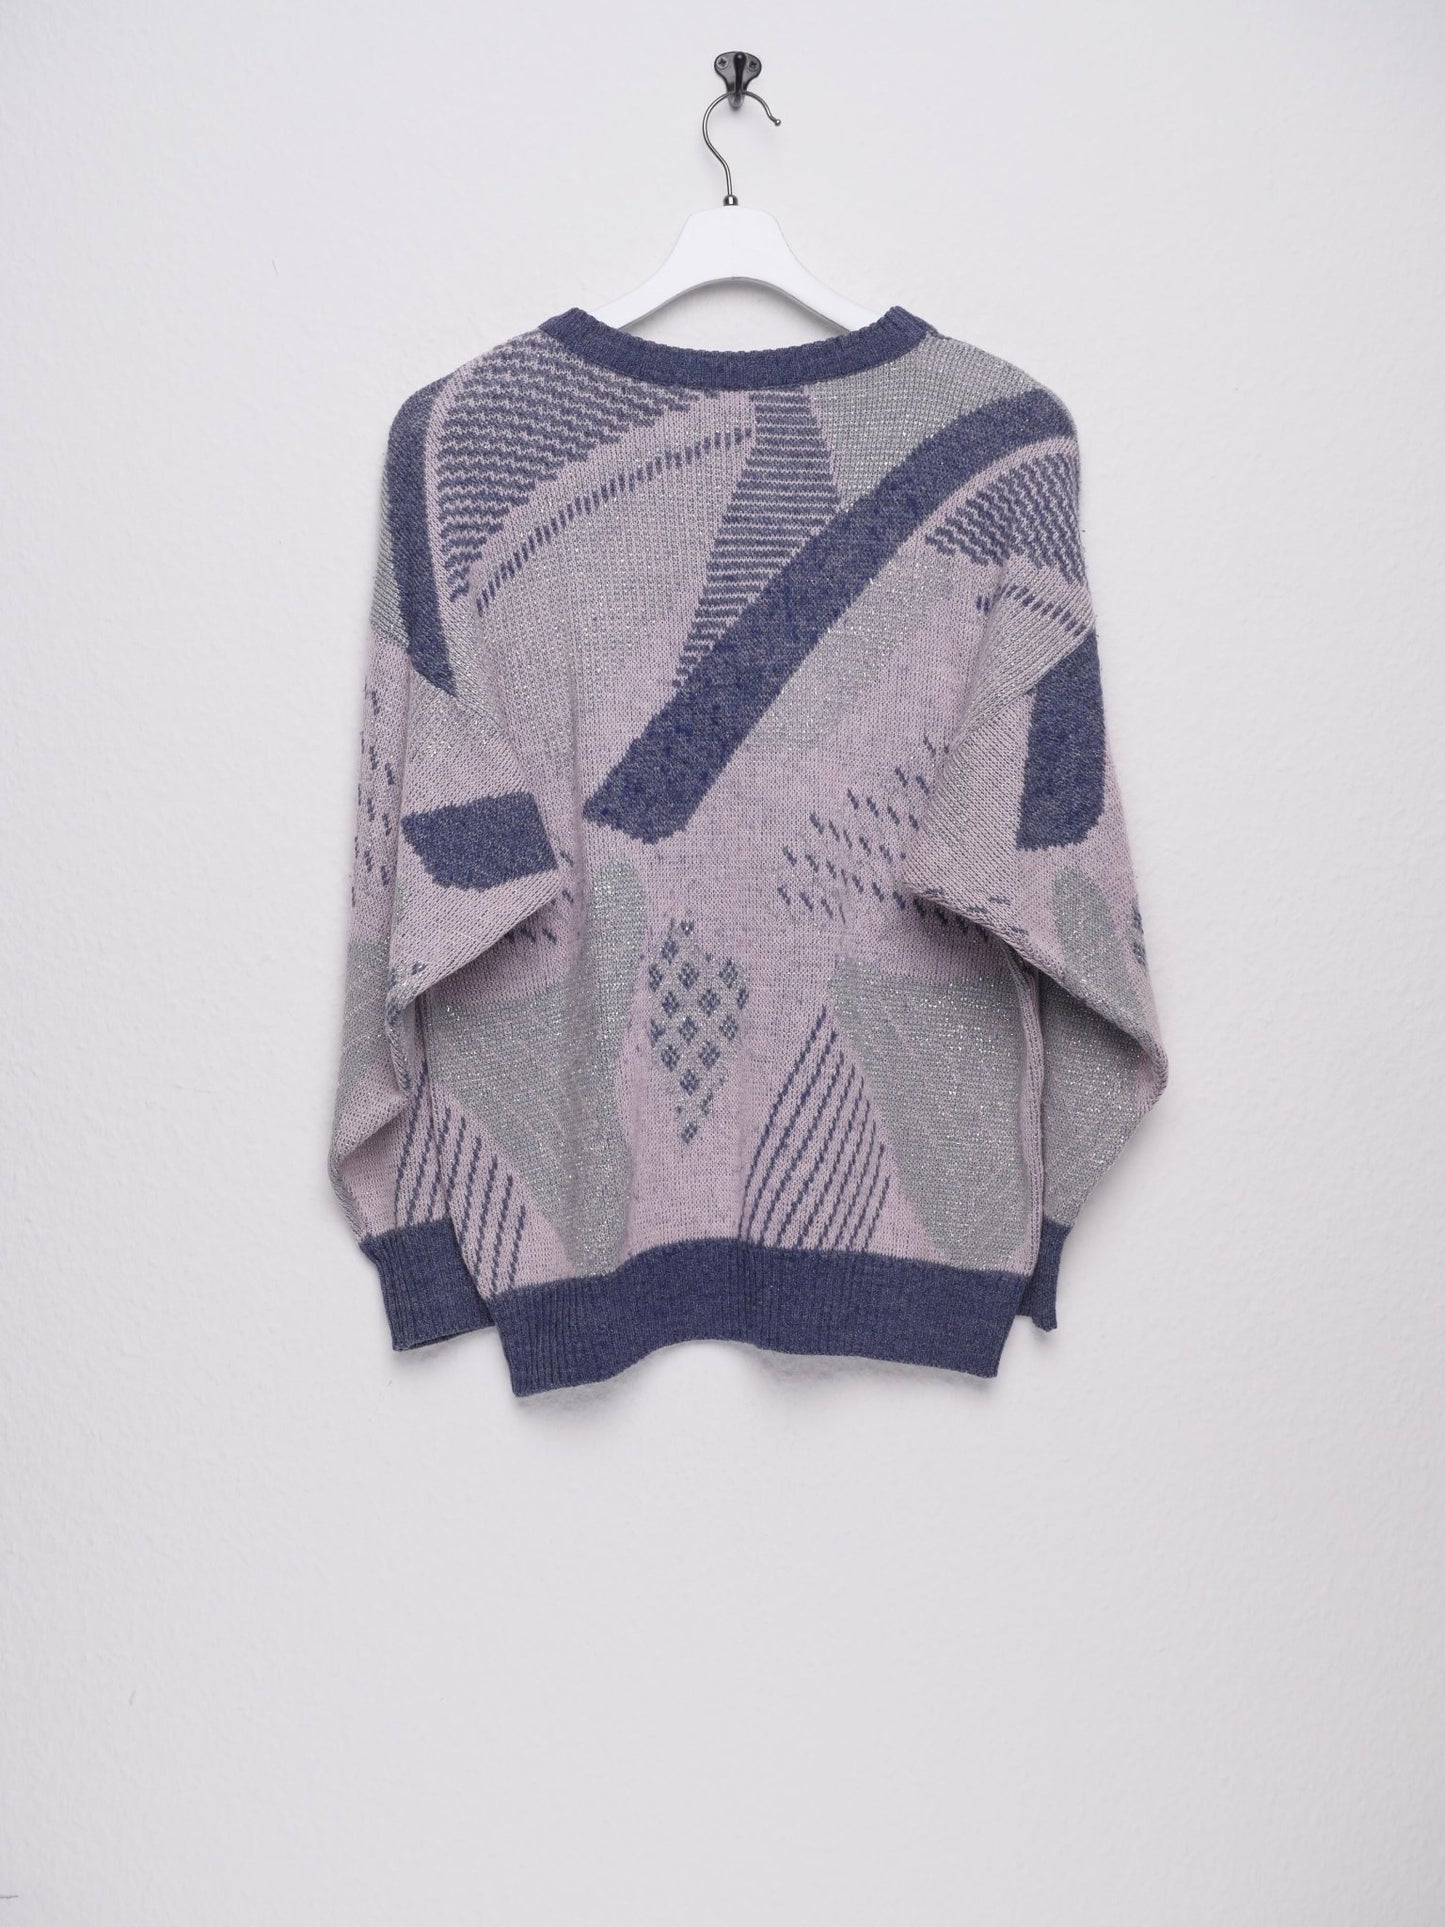 Knitted multicolored Wool Sweater - Peeces